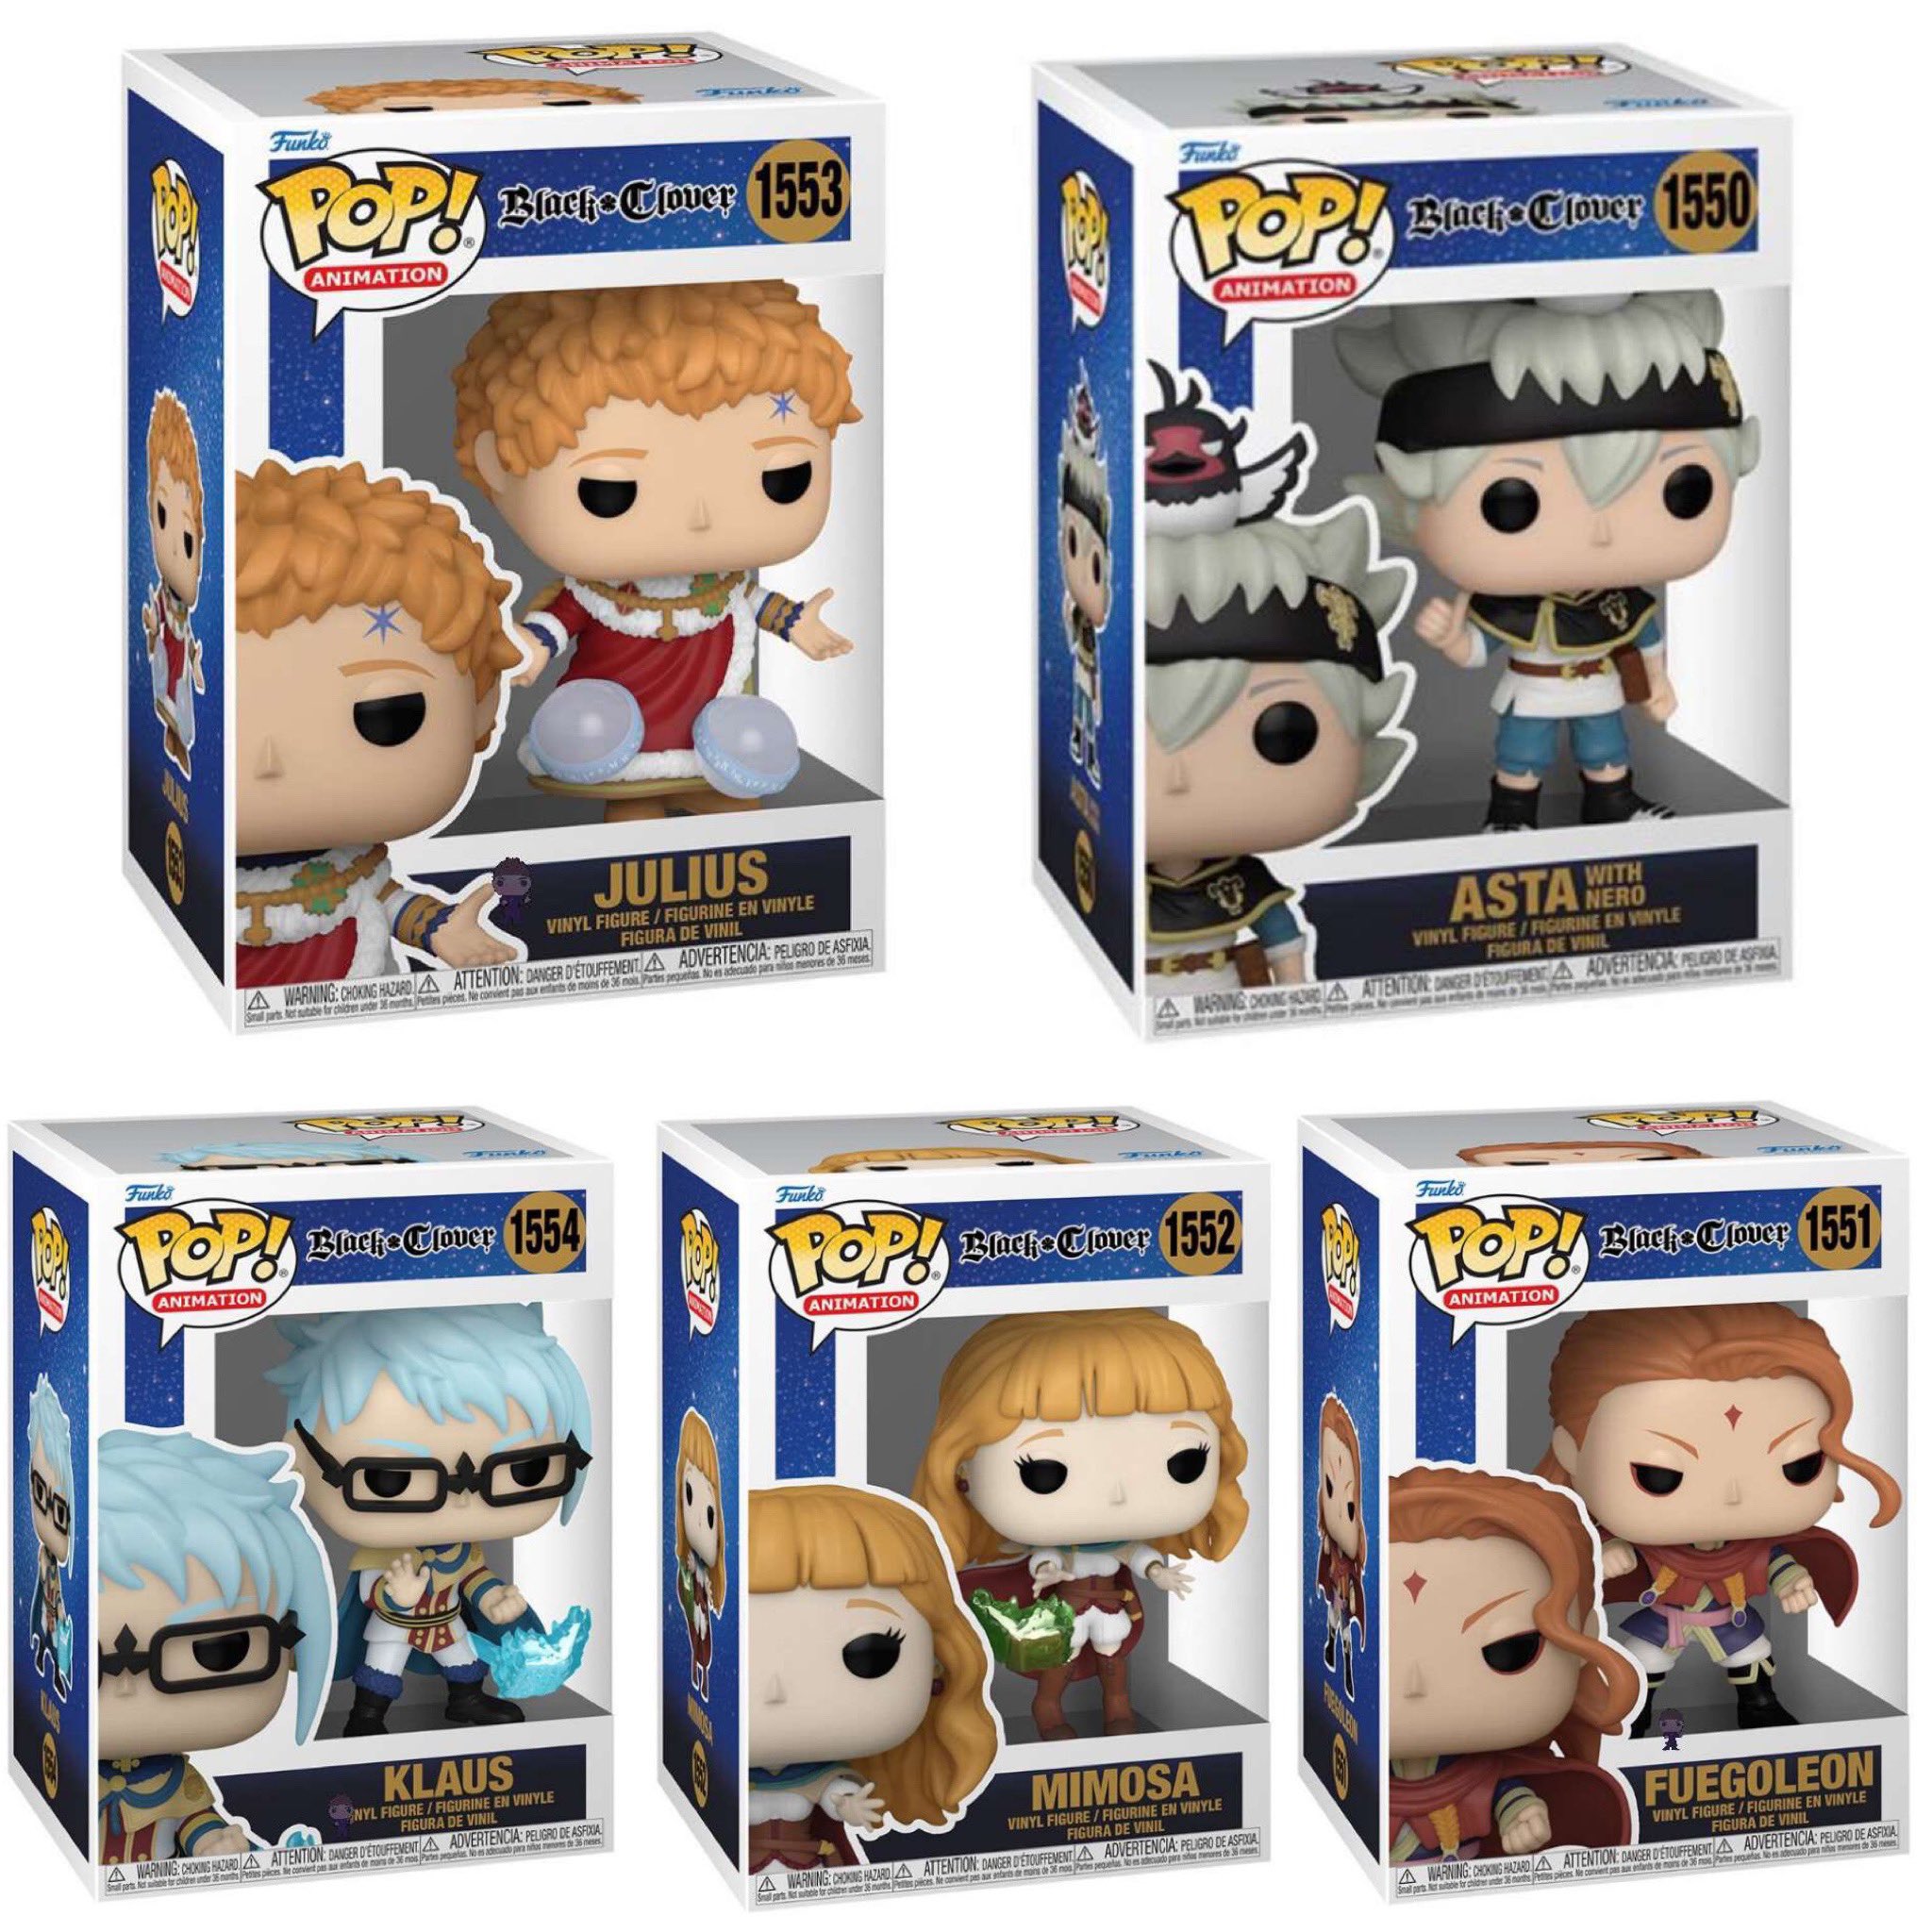 Black Clover Gets a New Wave of Funko Pops With Exclusives